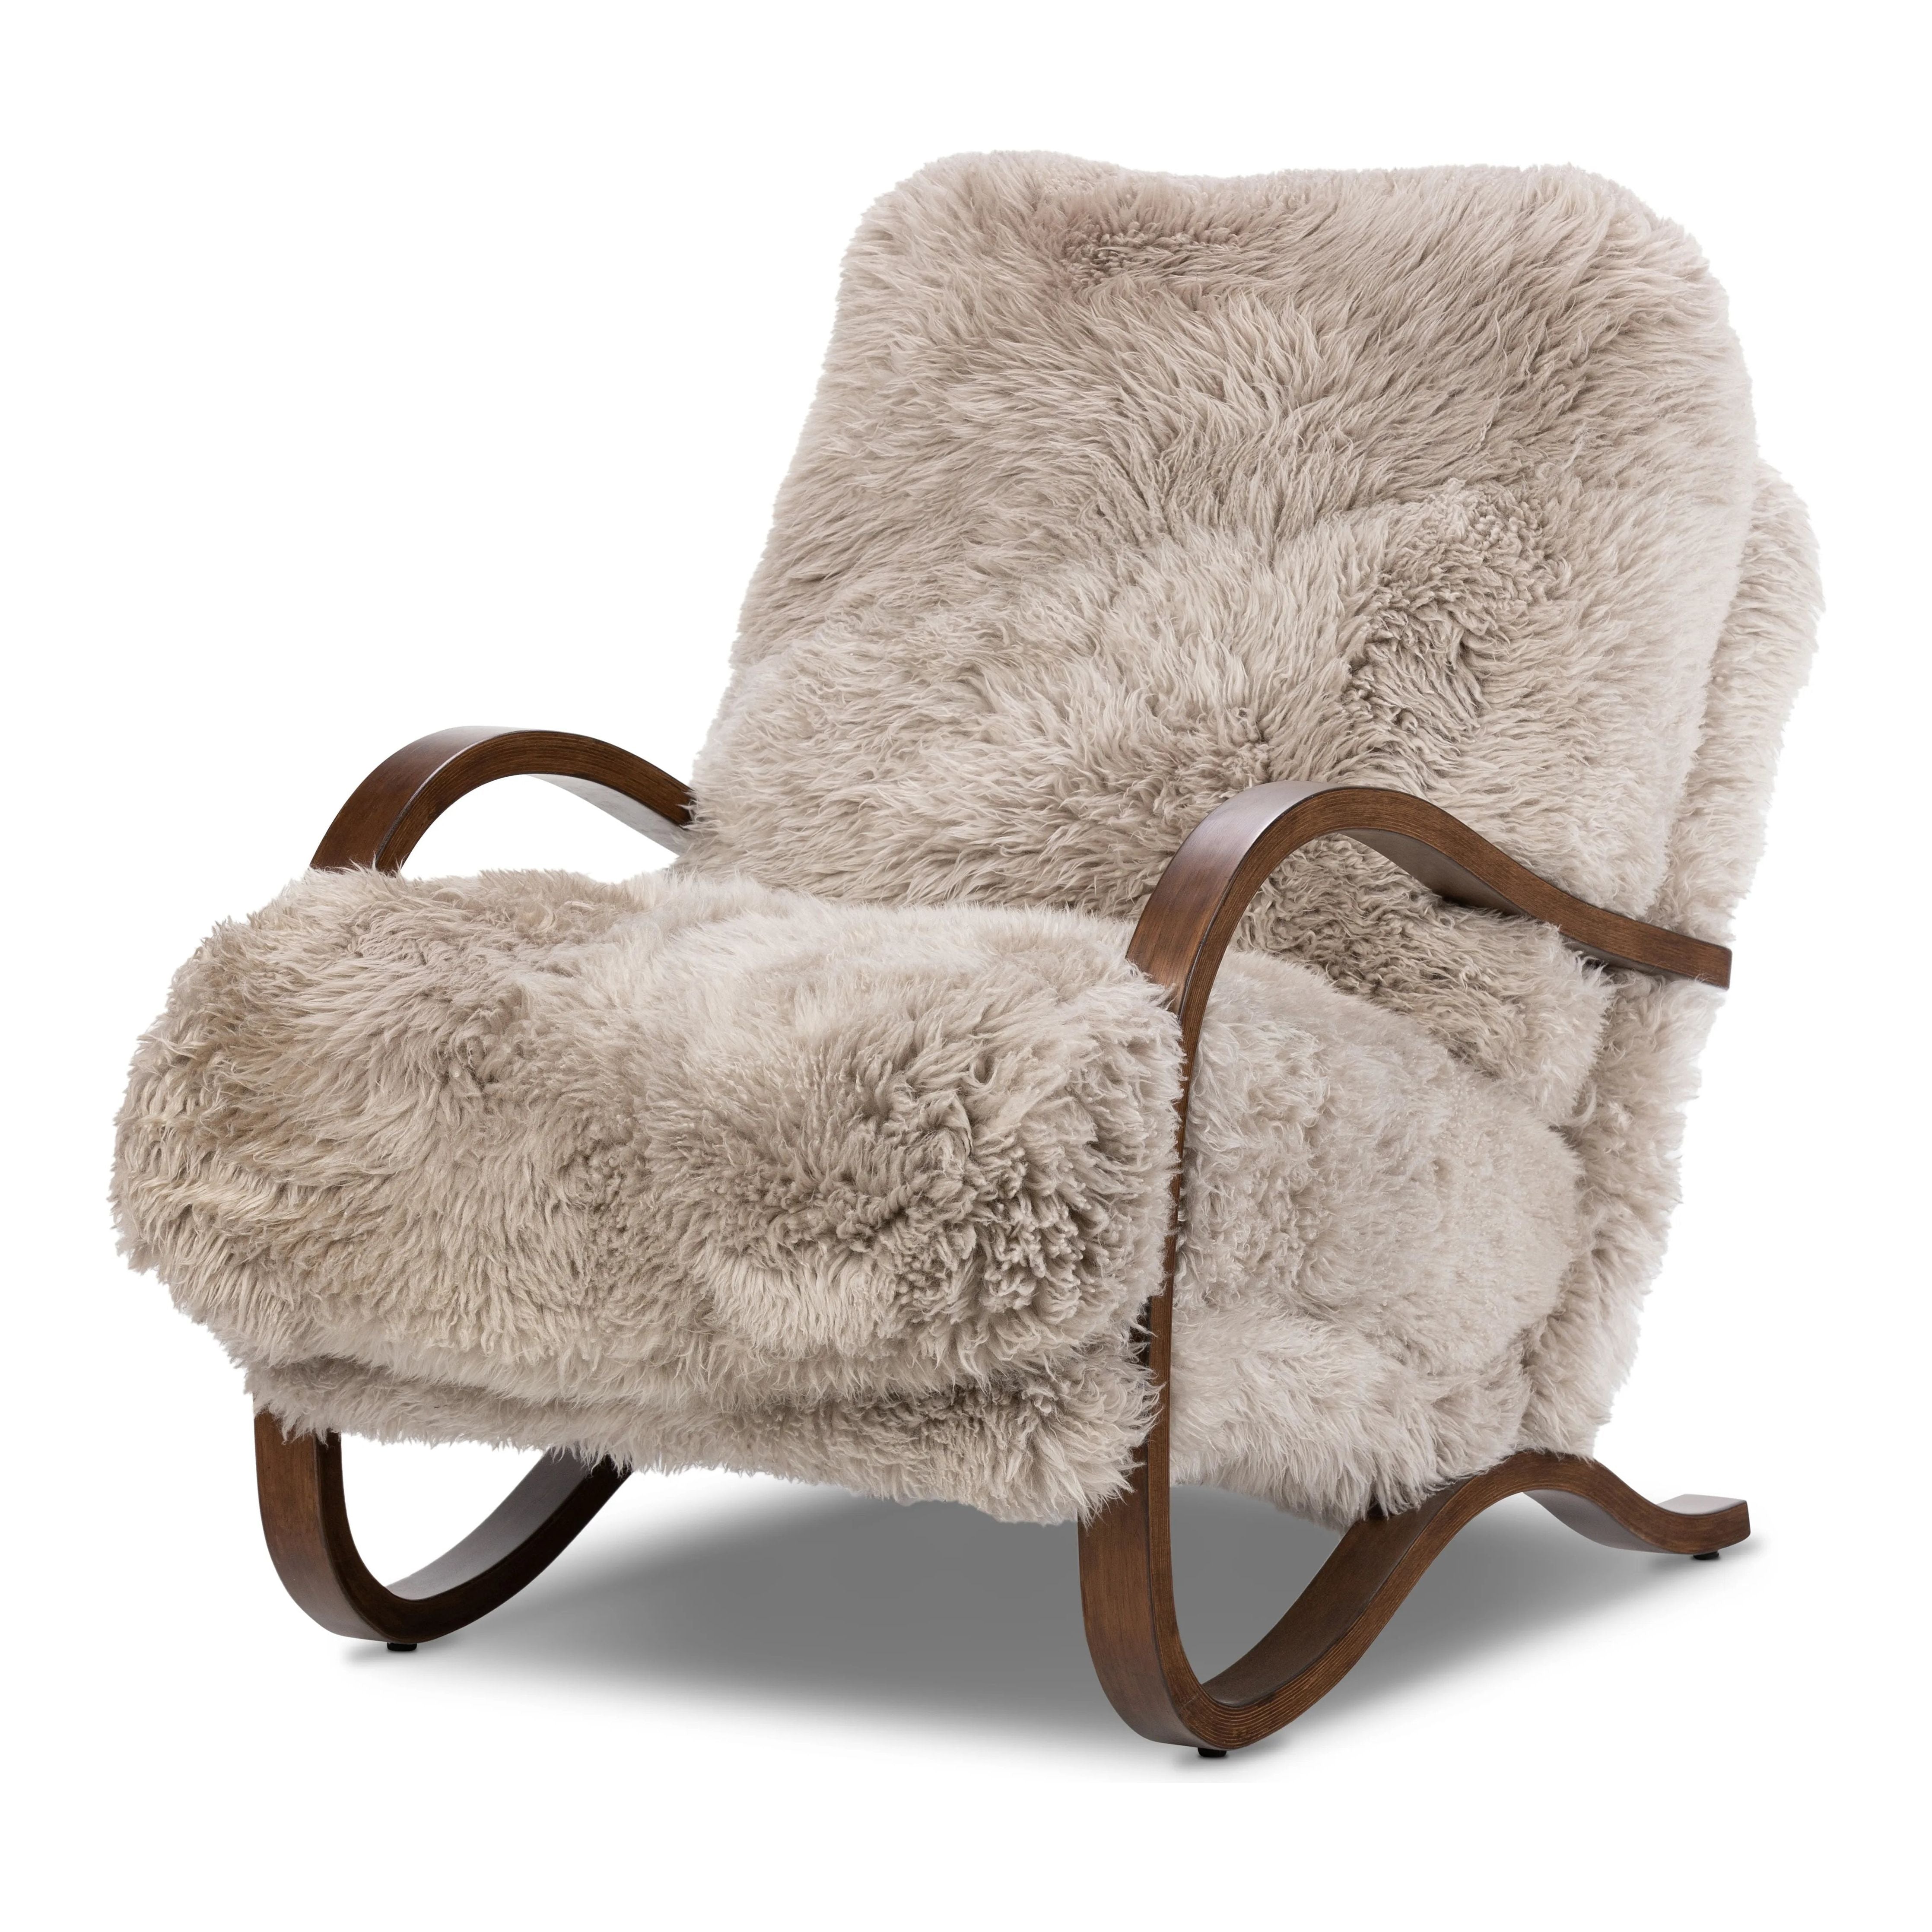 Ethically sourced authentic Mongolian sheepskin covers this unique statement chair, featuring removable feather-foam cushions. A cantilever-like wooden frame pairs with a webbed suspension seat to offer a true sink-in sit Amethyst Home provides interior design, new home construction design consulting, vintage area rugs, and lighting in the Washington metro area.